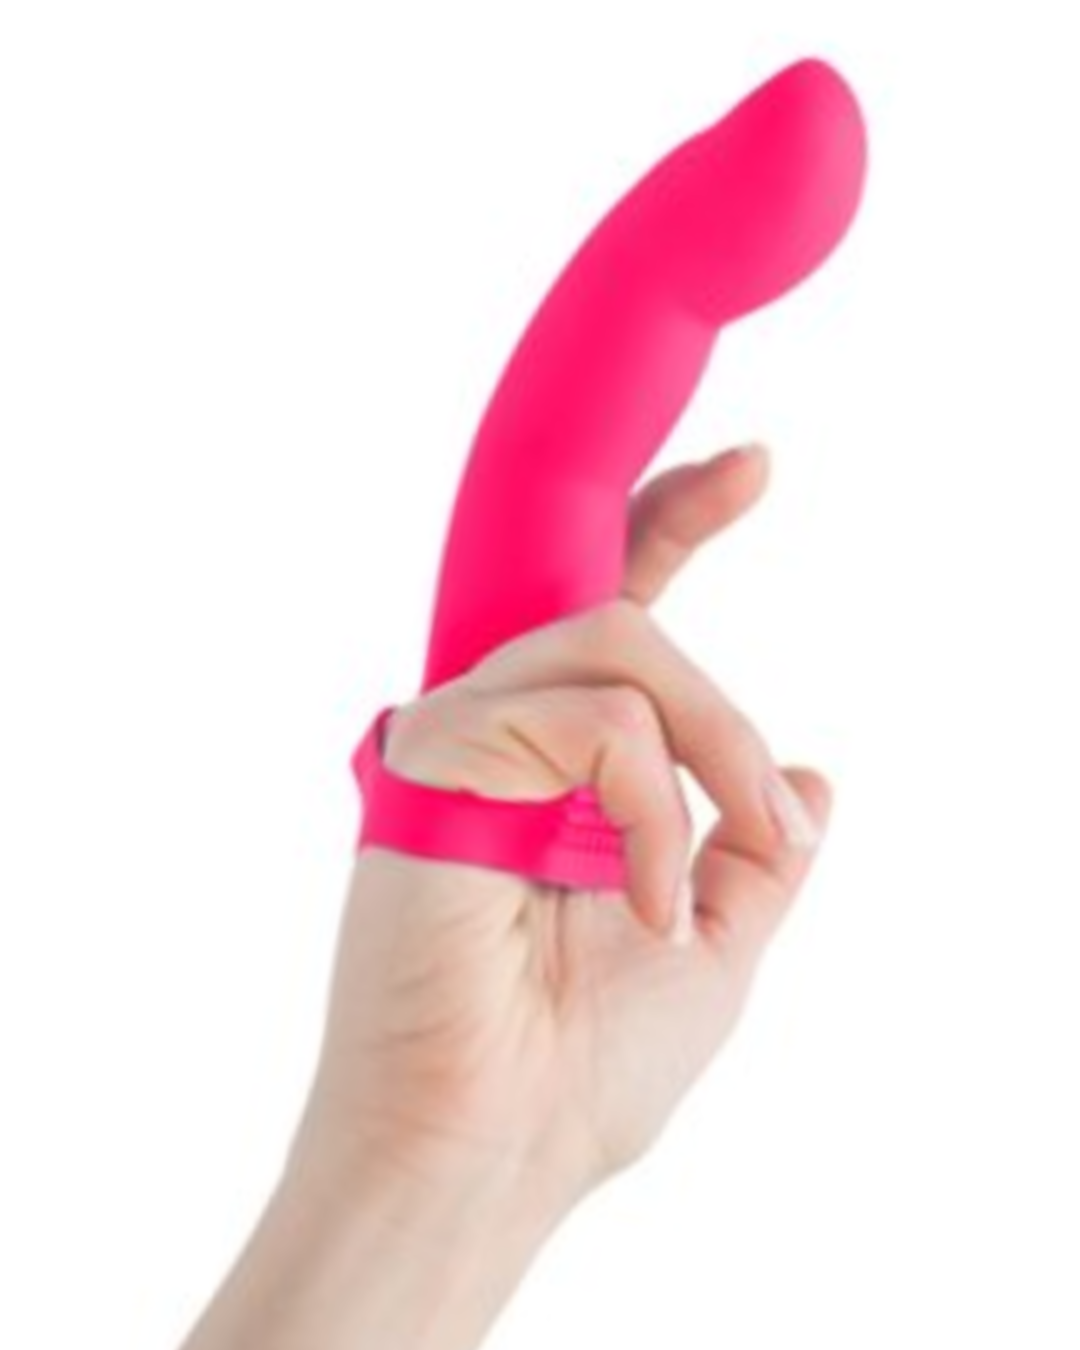 Simple and True Extra Touch Silicone G-Spot Finger Extender - Pink against a white background worn on a person's middle finger, showing the whole hand